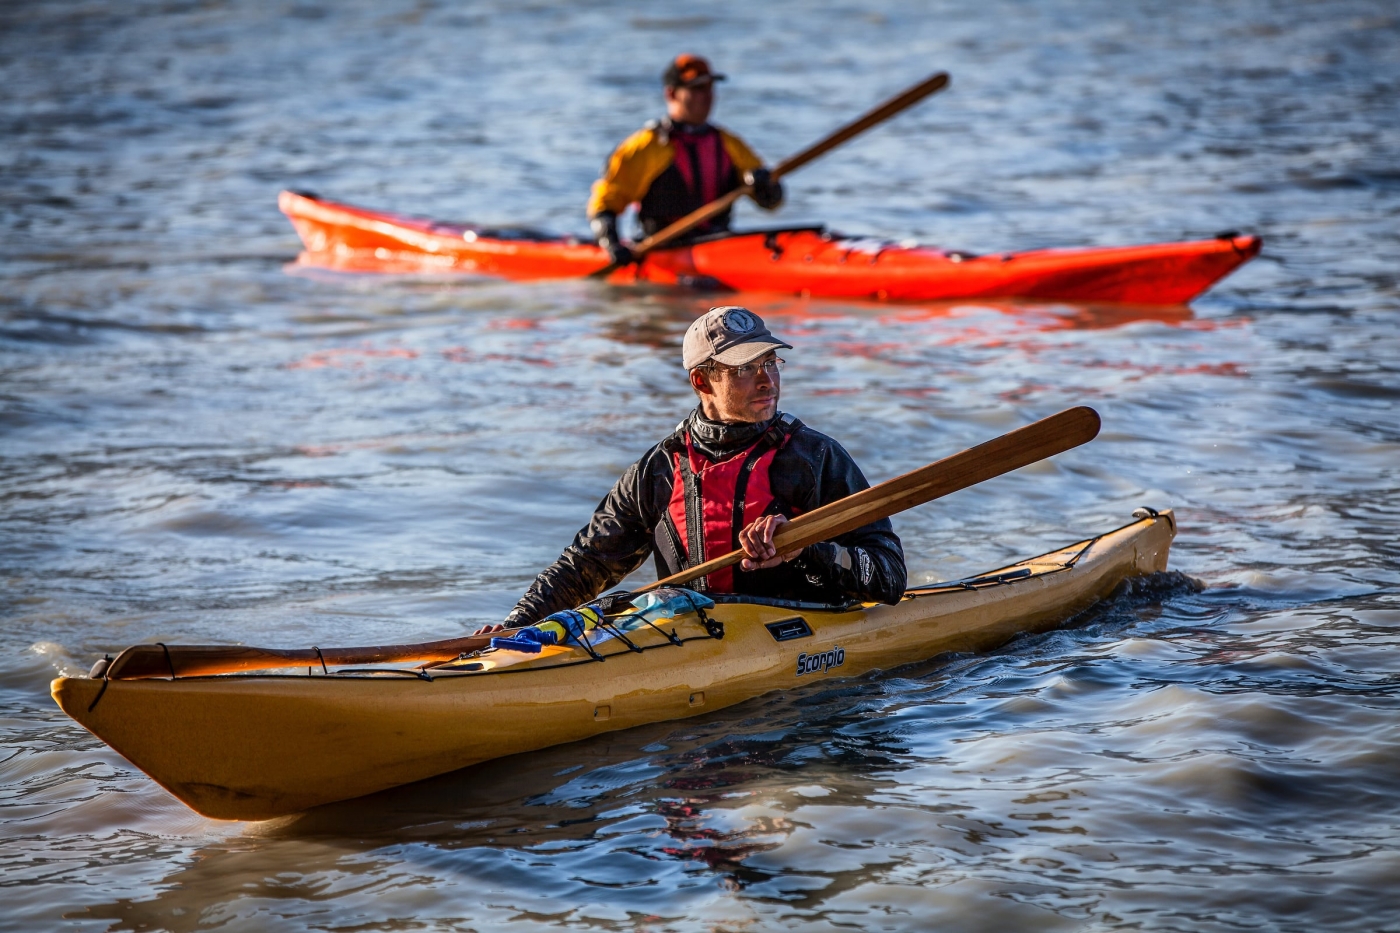 Kayaking with Greenland Outdoors in Greenland. Photo by Mads Pihl - Visit Greenland